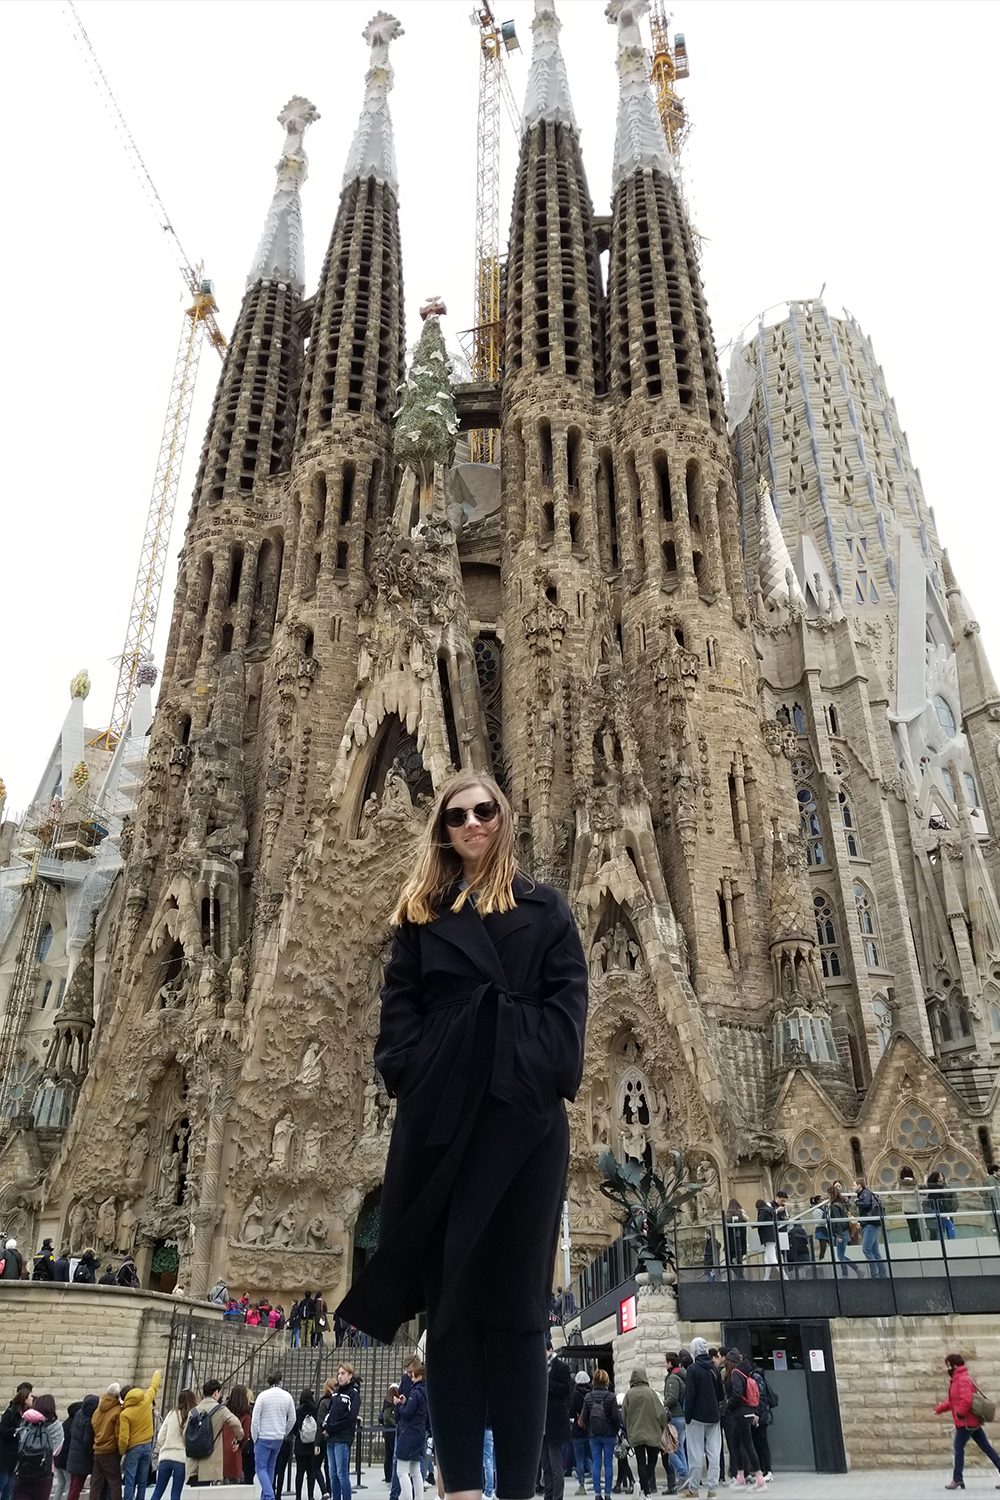 Katie Penrod stands in front of the Sagrada Familia, looking at the camera. Many people look up at the church in the background